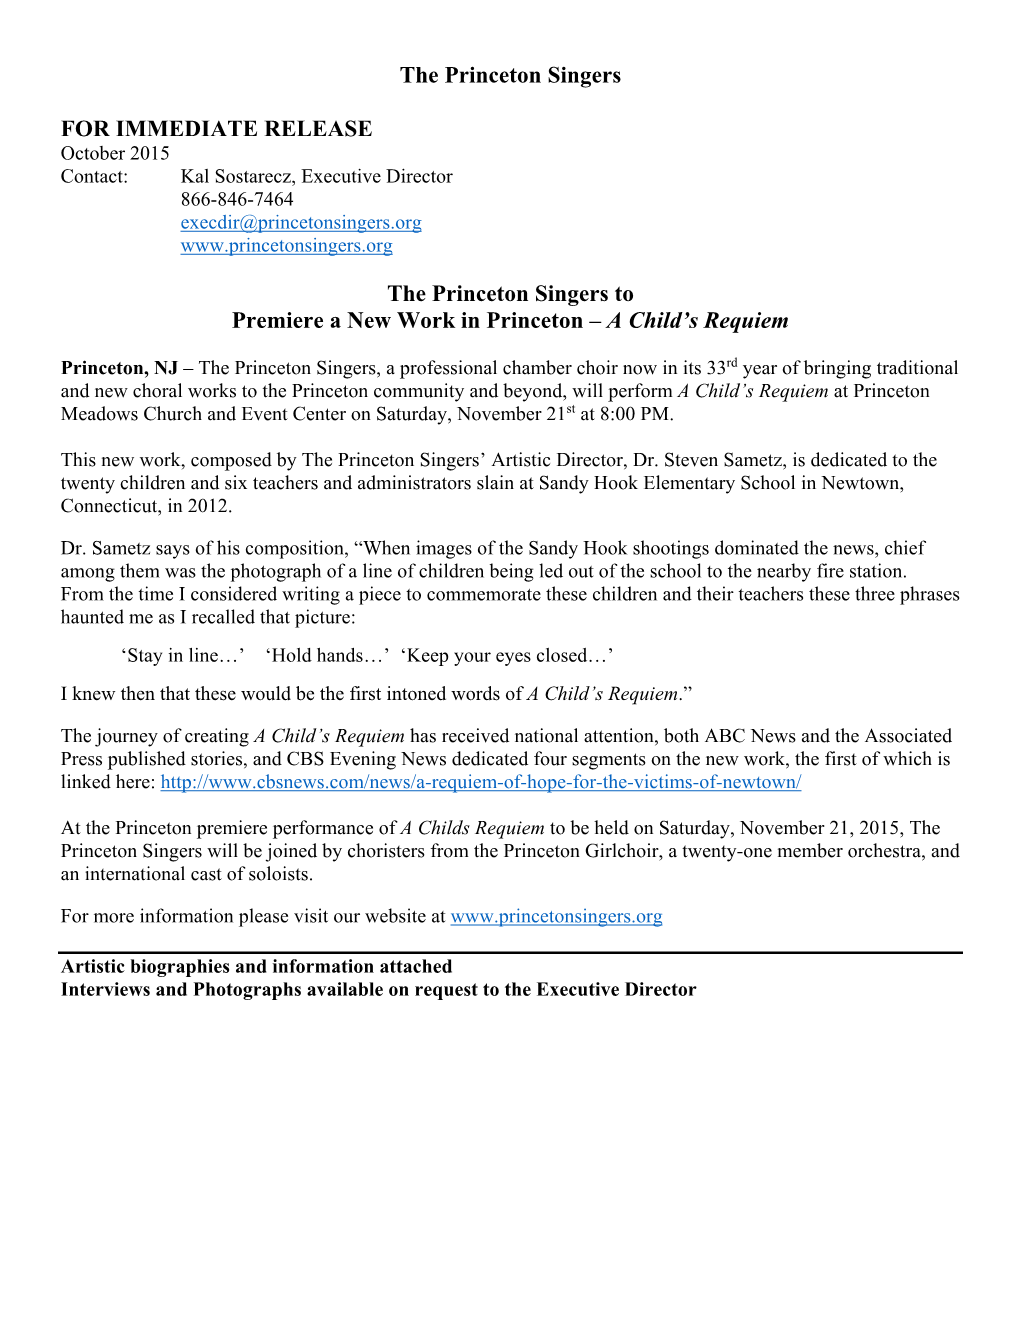 The Princeton Singers for IMMEDIATE RELEASE the Princeton Singers to Premiere a New Work in Princeton – a Child's Requiem